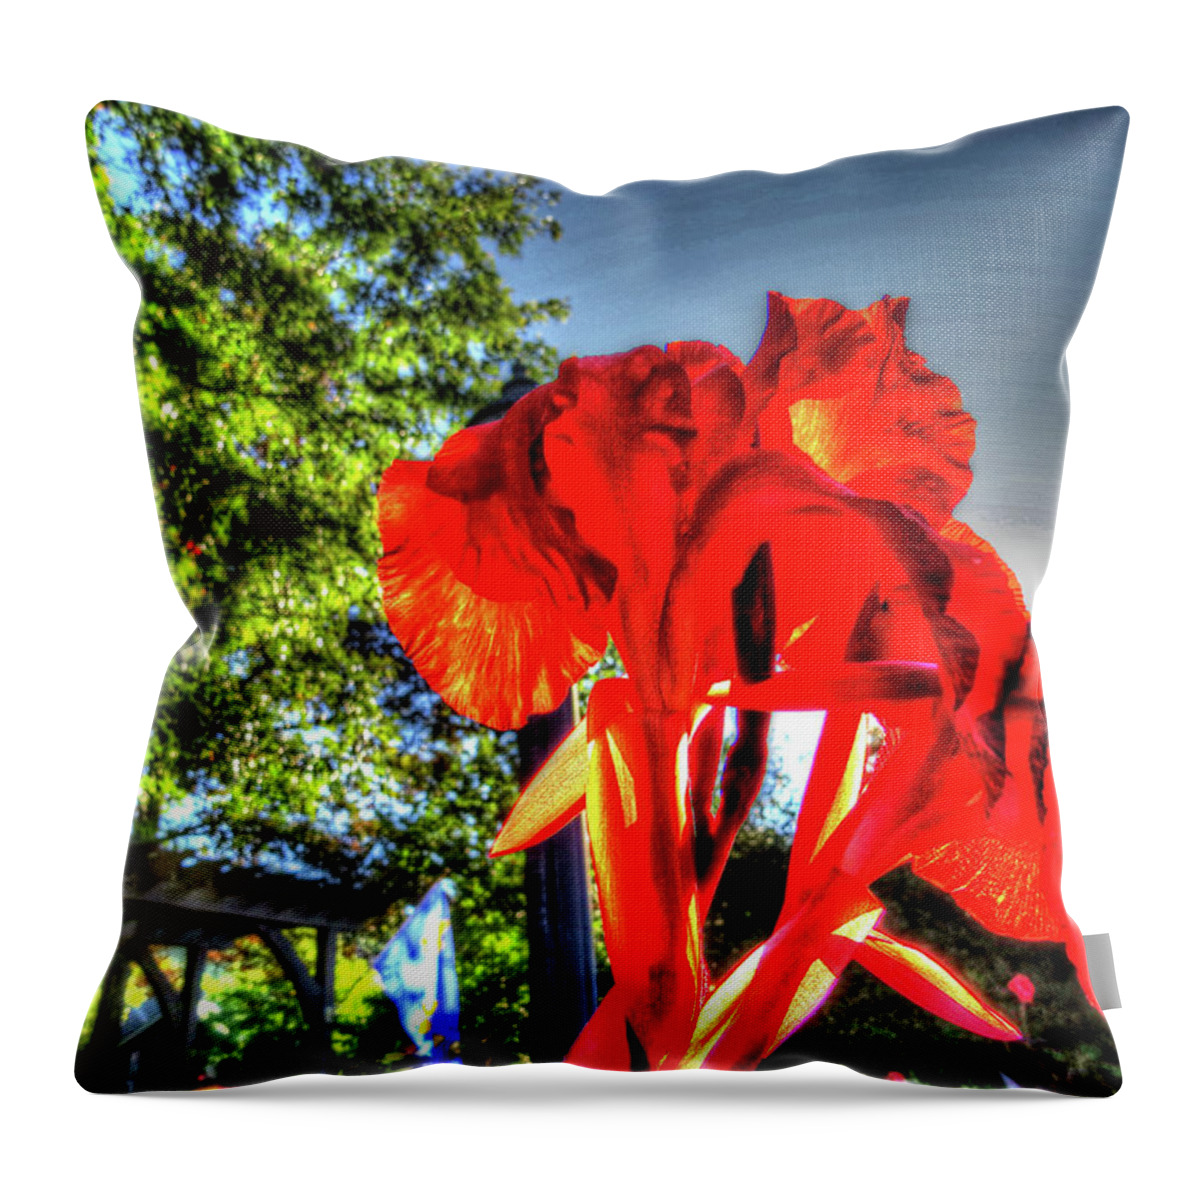 Flowers Throw Pillow featuring the digital art Big Red by Kathleen Illes